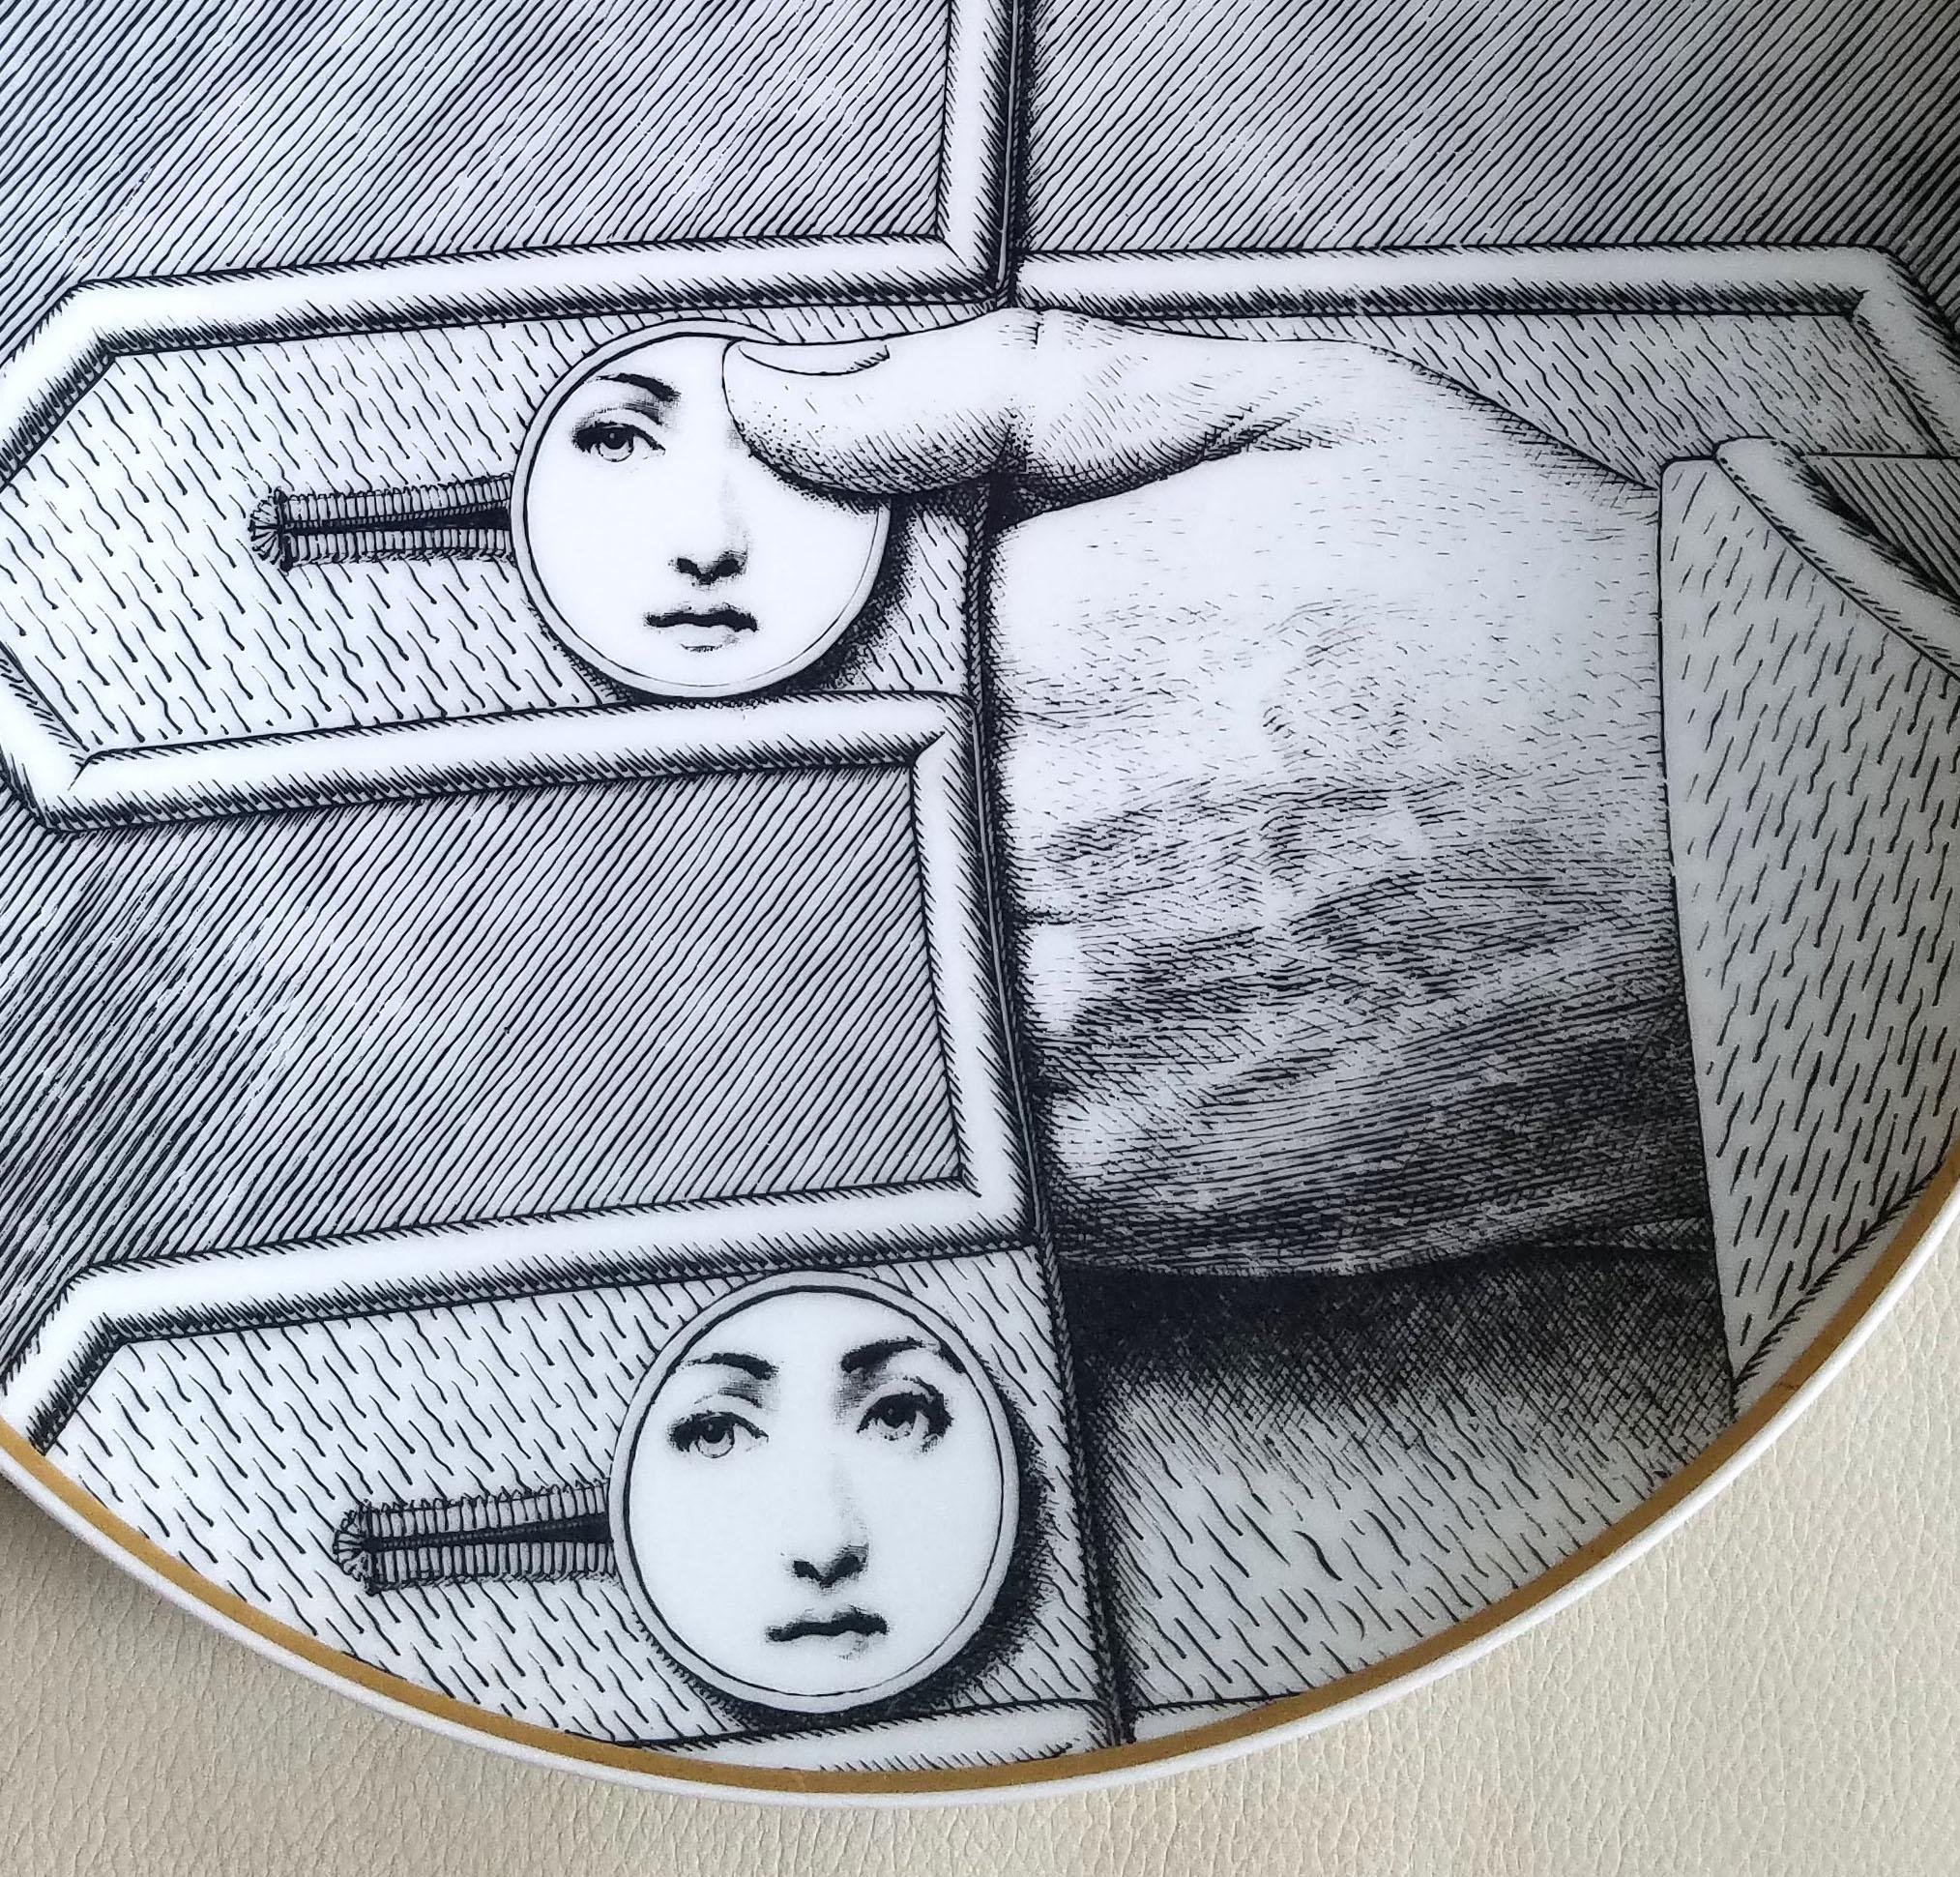 Mid-Century Modern Rosenthal Fornasetti Porcelain Plate, Temi e Variazioni, Themes and Variations